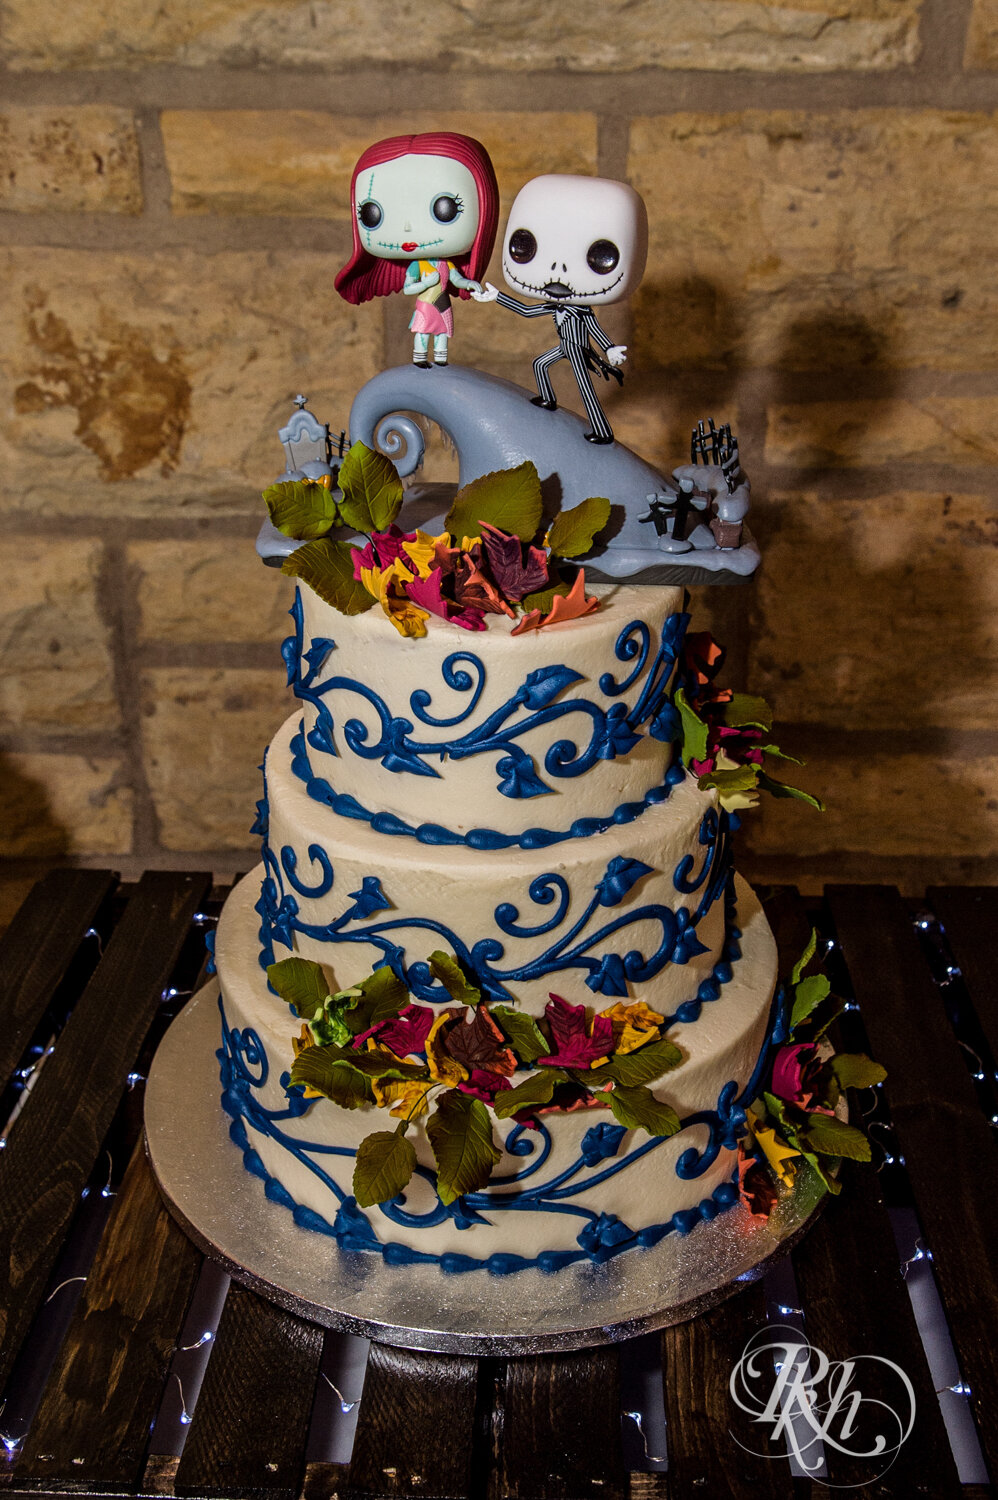 Wedding desert table with Nightmare Before Christmas topper at Olmsted County Fairgrounds in Rochester, Minnesota.